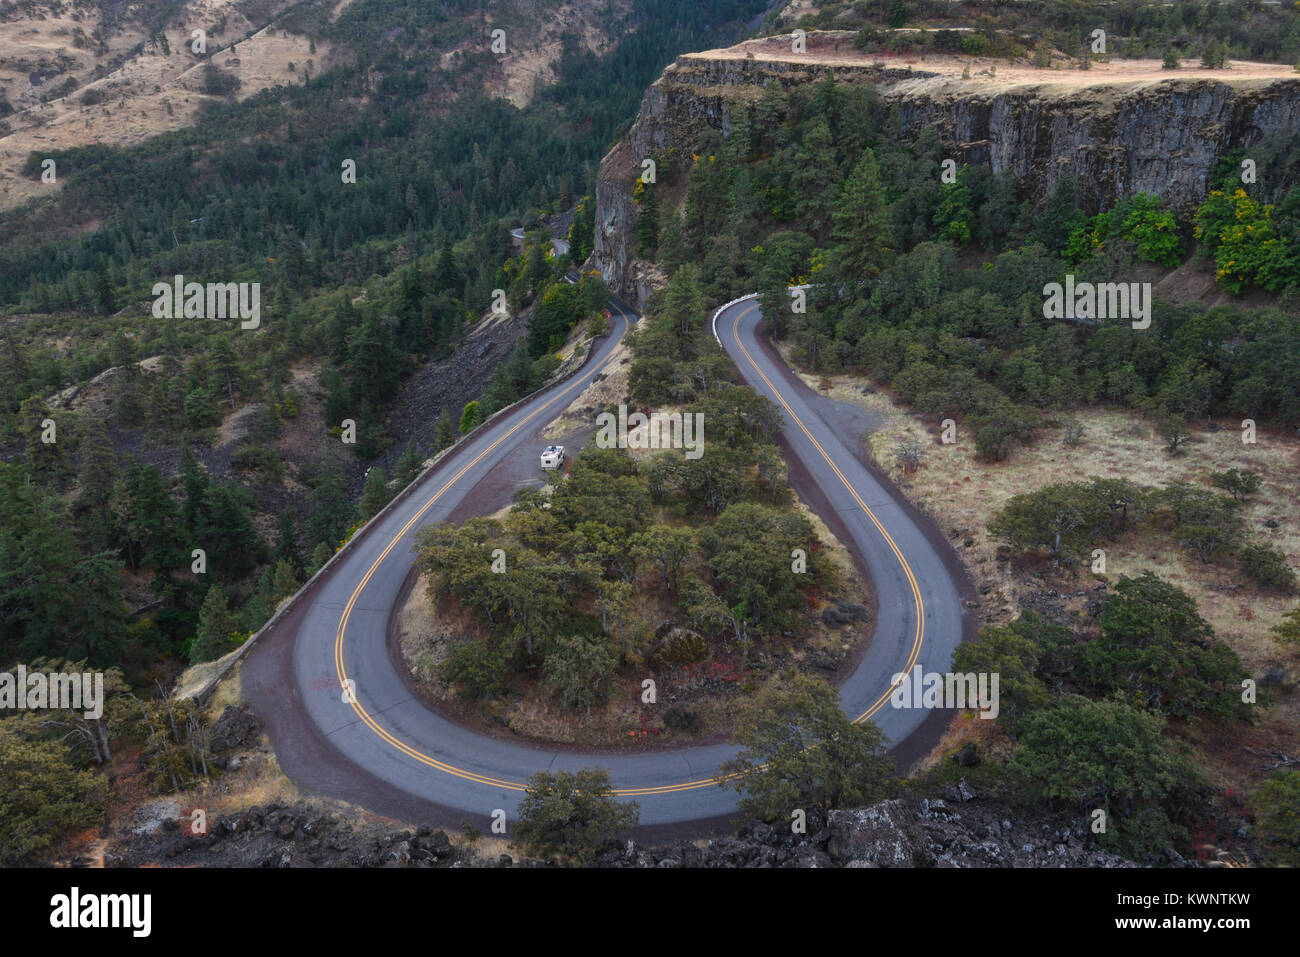 View from the high cliff Rowena Crest over the hairpin bend switchback in the highway next to Columbia River, Oregon, USA Stock Photo